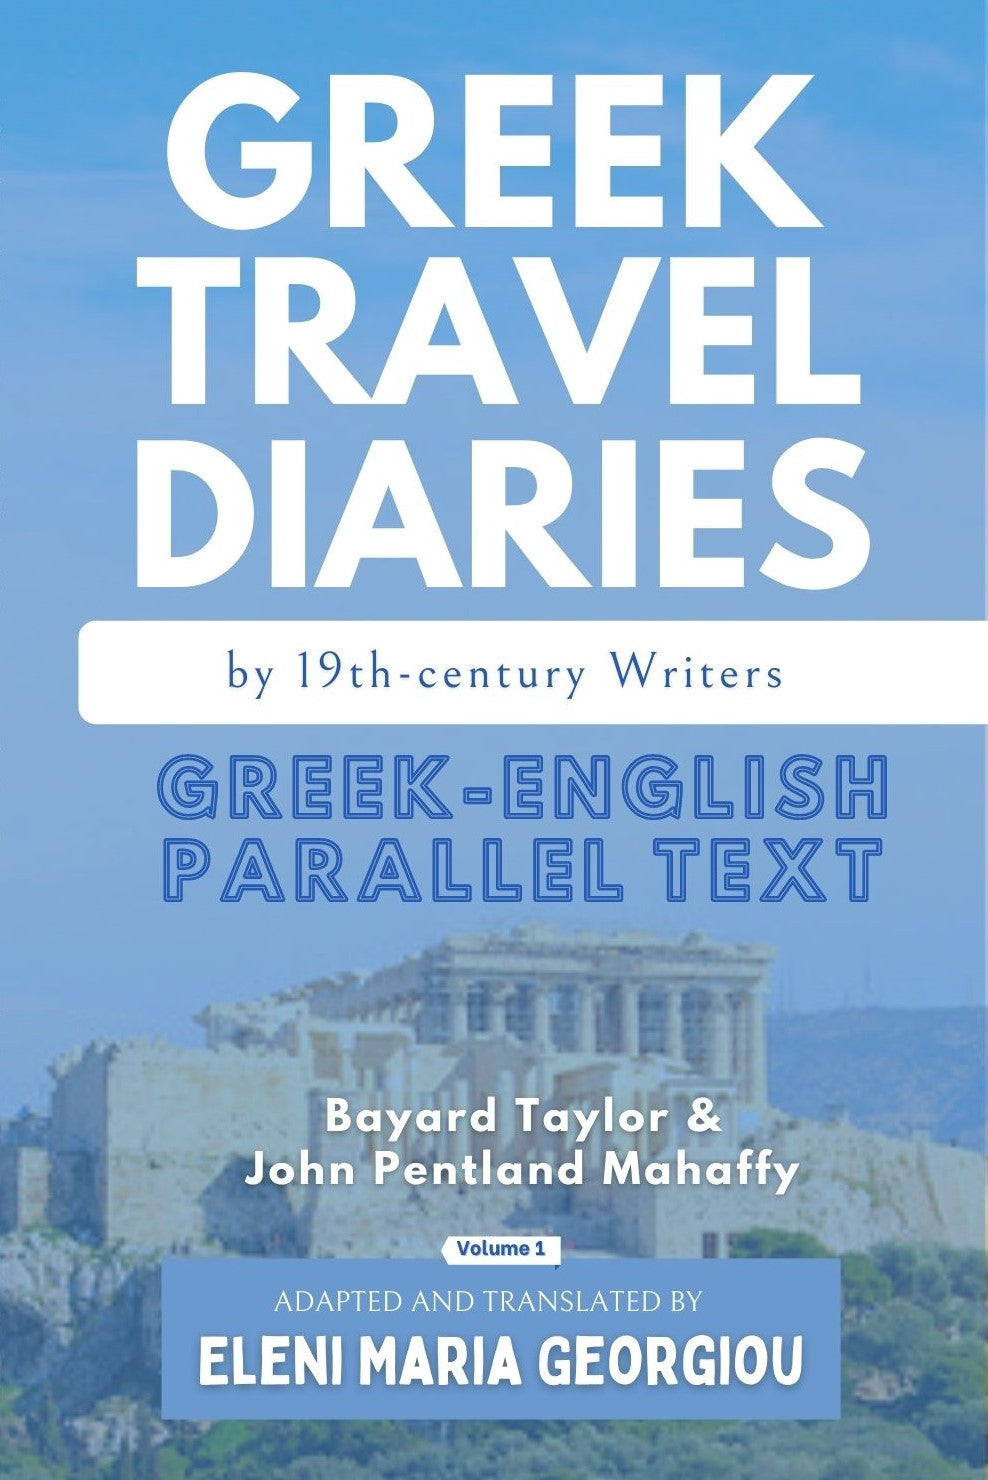 Greek Travel Diaries by 19th-century Writers: Greek-English Parallel Text - Volume 1